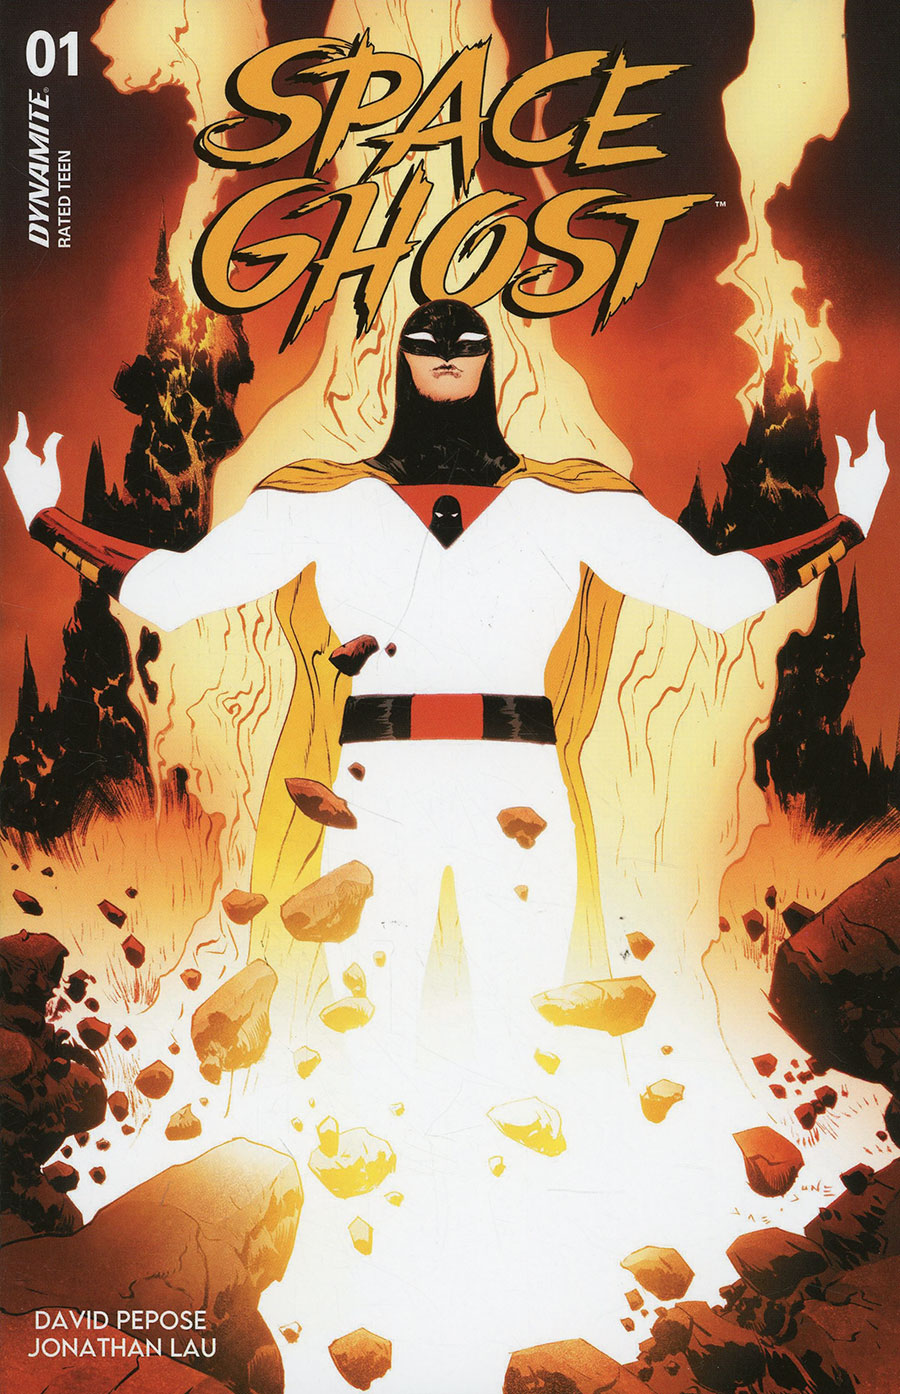 Space Ghost Vol 4 #1 Cover B Variant Jae Lee & June Chung Cover